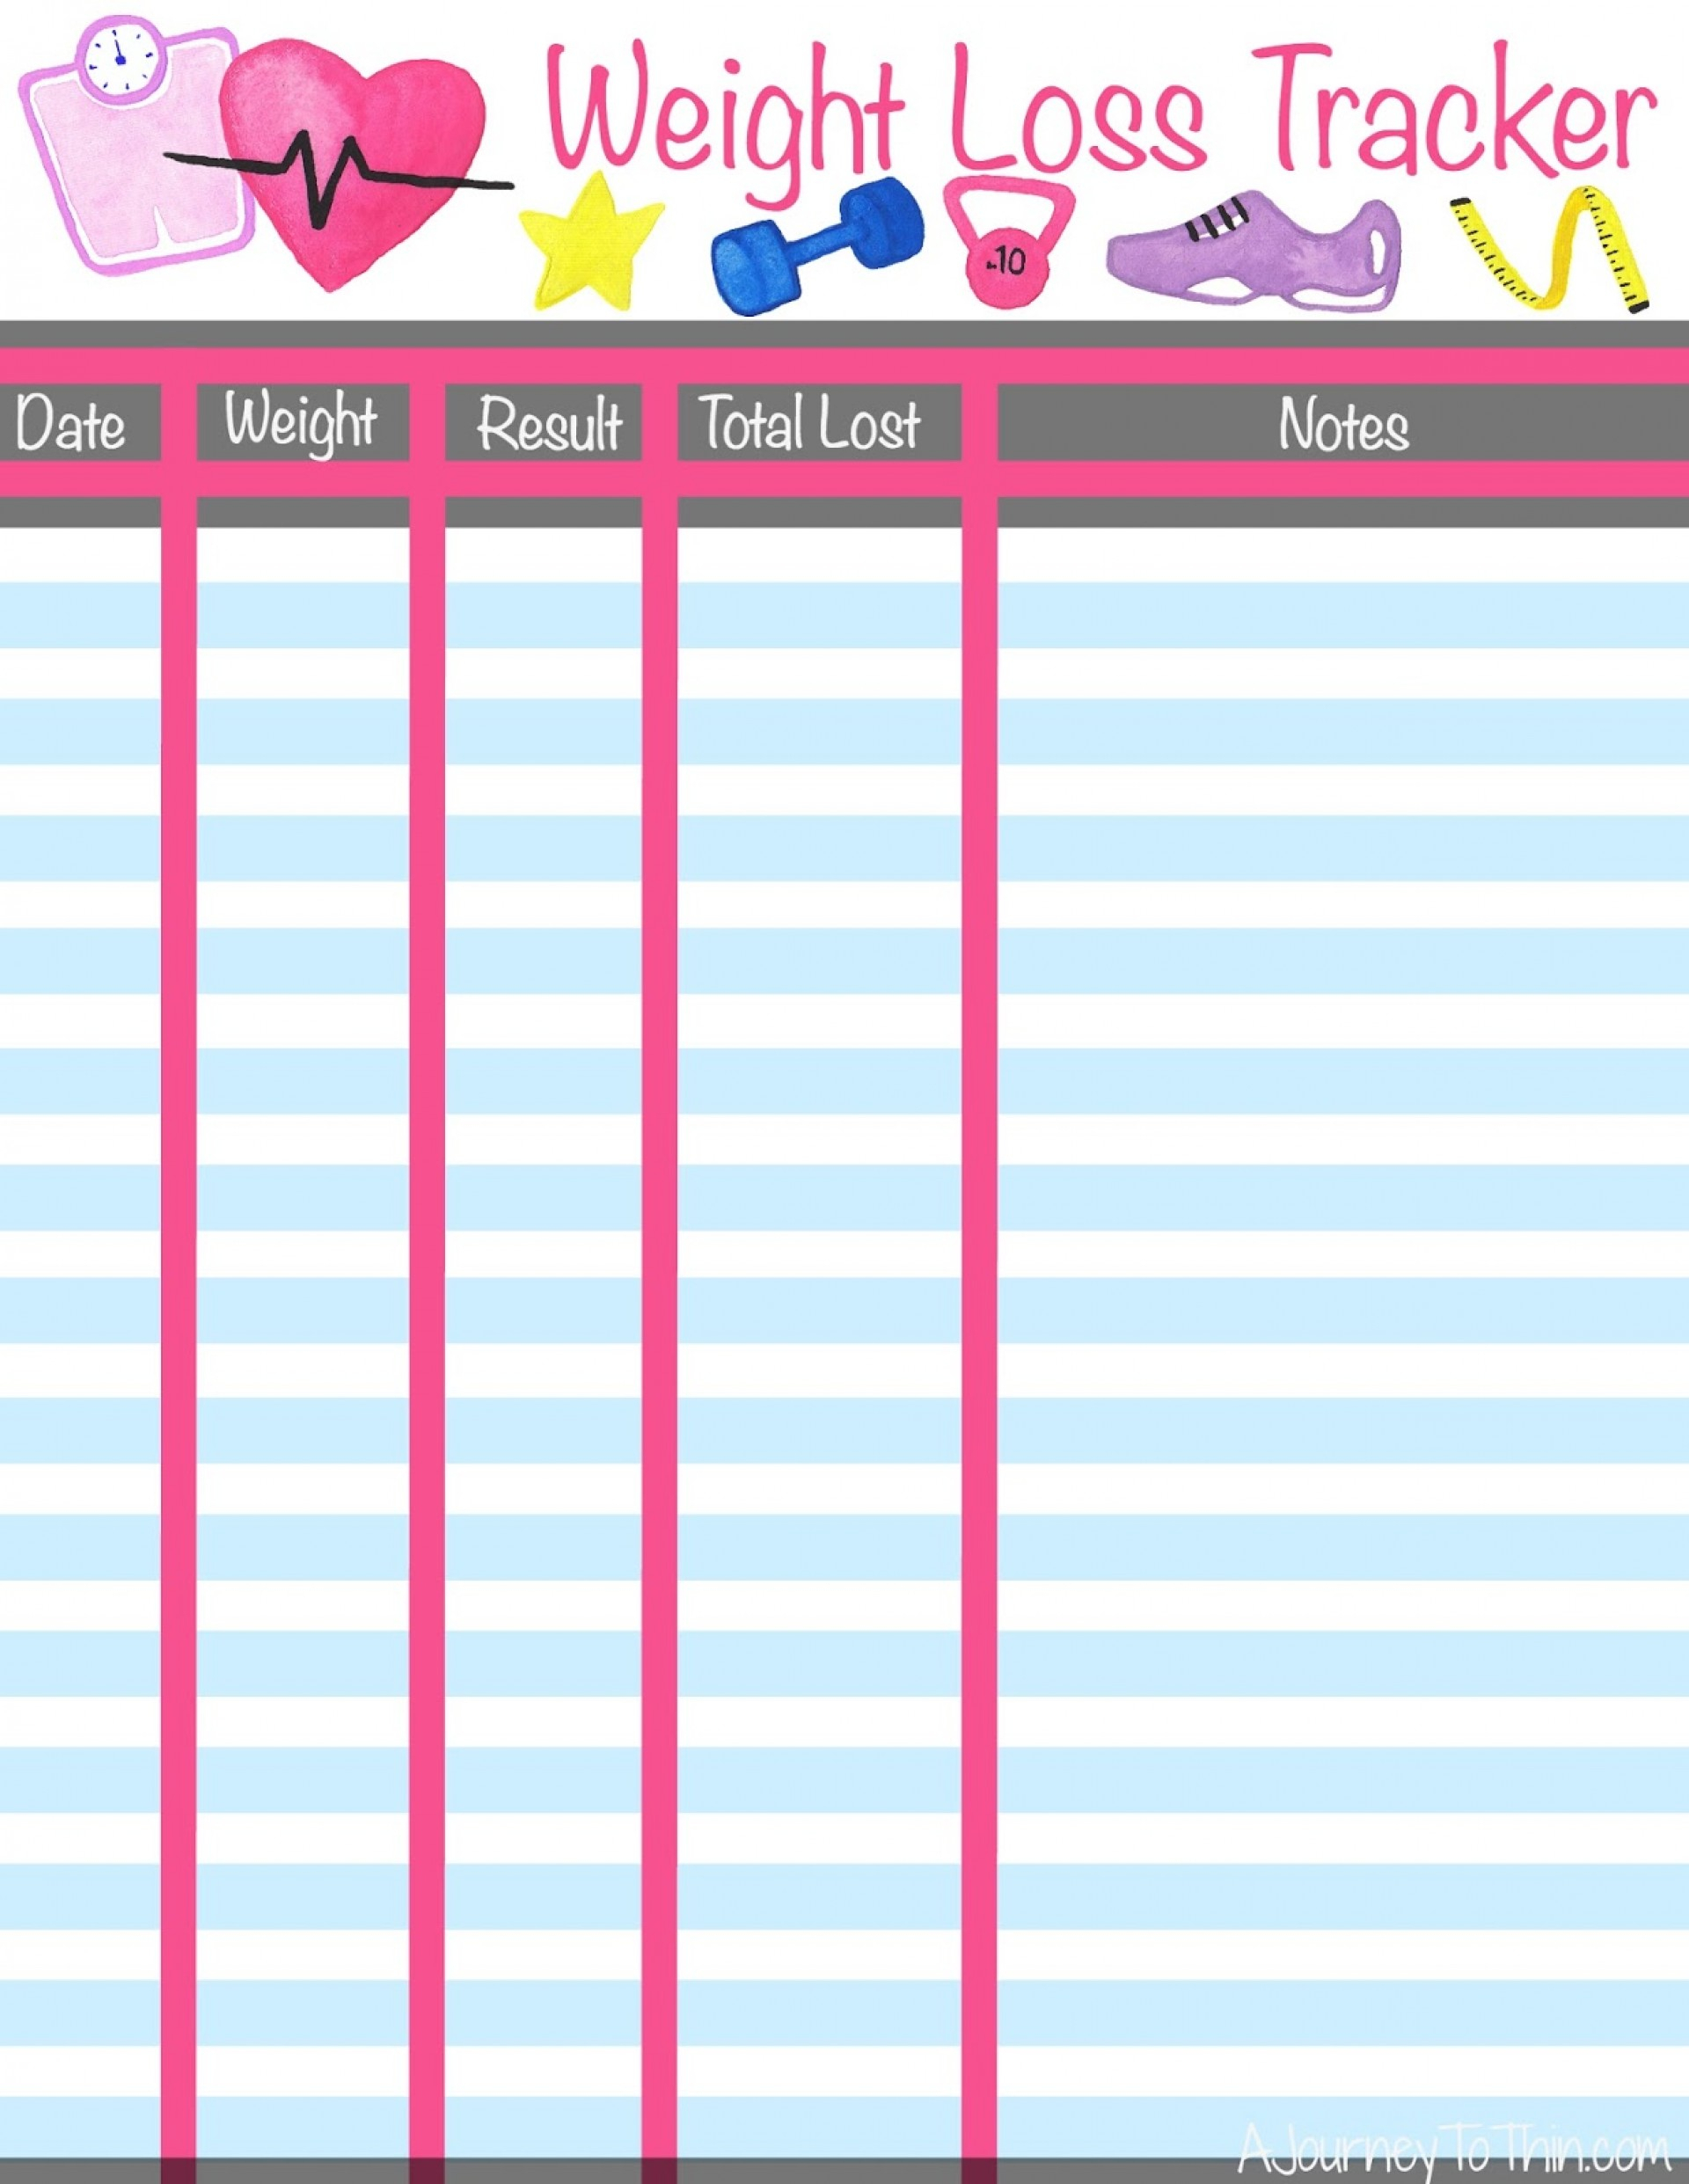 Weight Loss Spreadsheet For Group Intended For 001 Weight Loss Tracker Template ~ Ulyssesroom